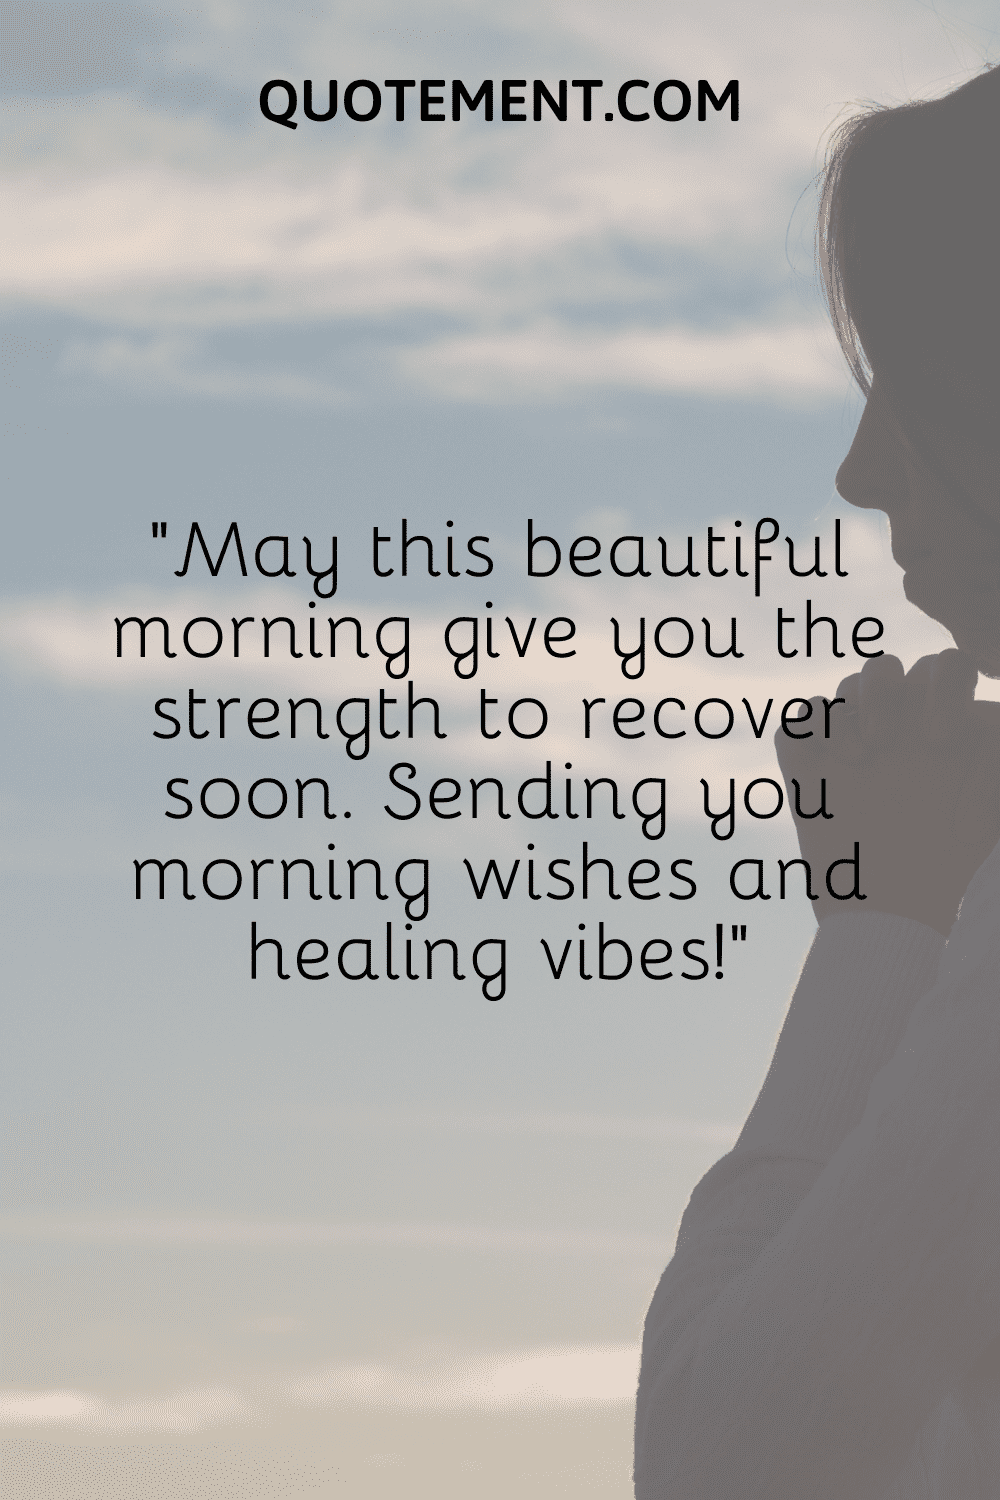 May this beautiful morning give you the strength to recover soon